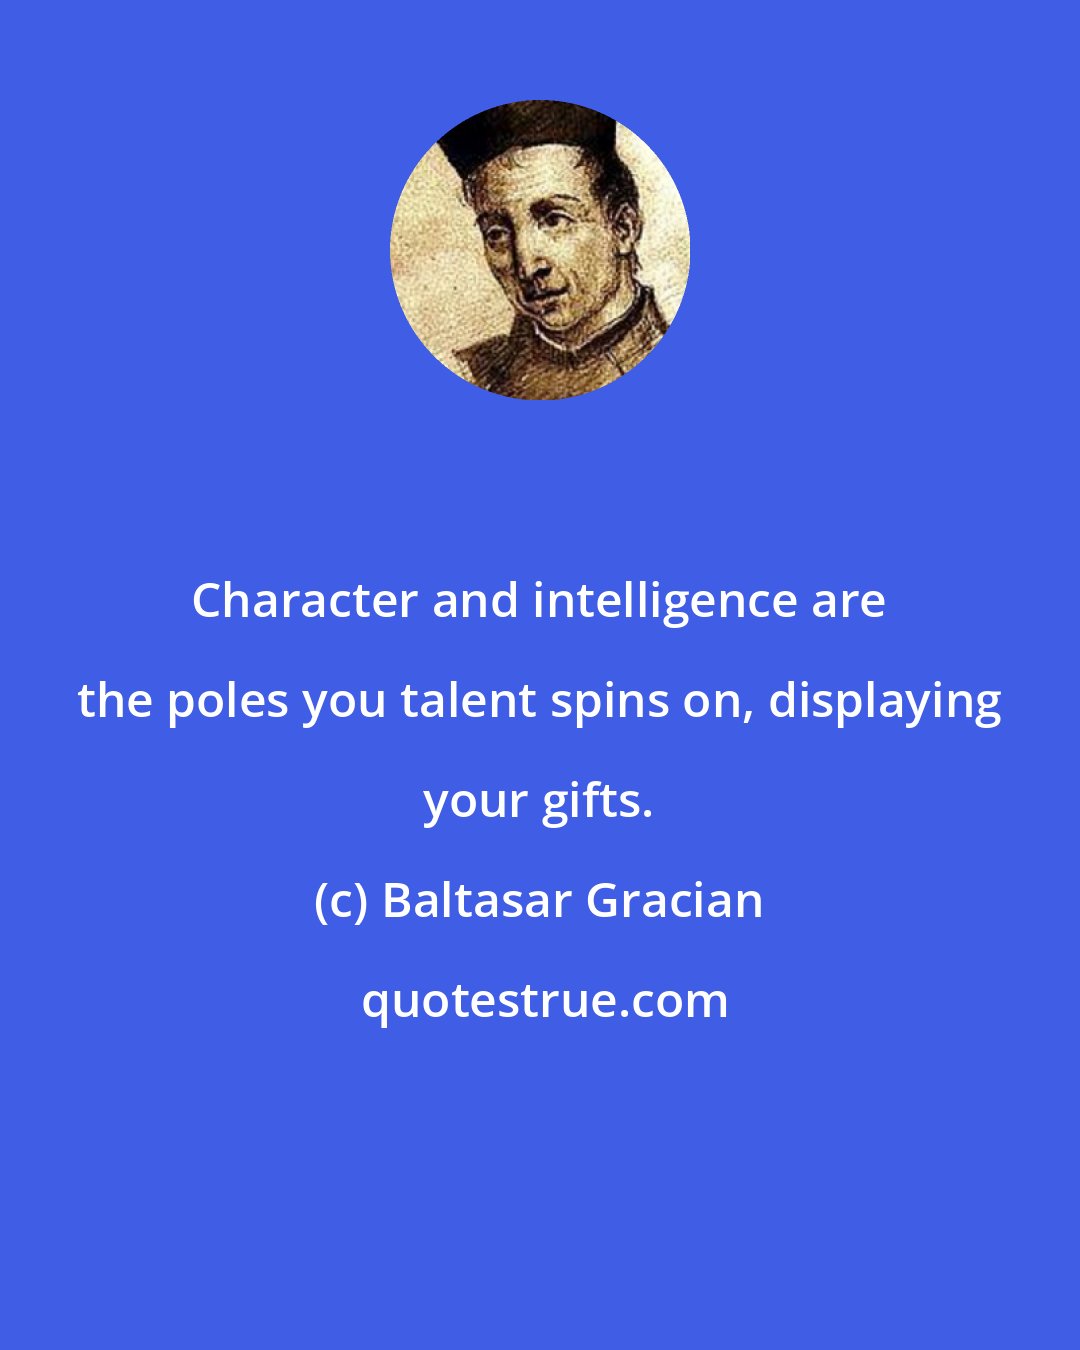 Baltasar Gracian: Character and intelligence are the poles you talent spins on, displaying your gifts.